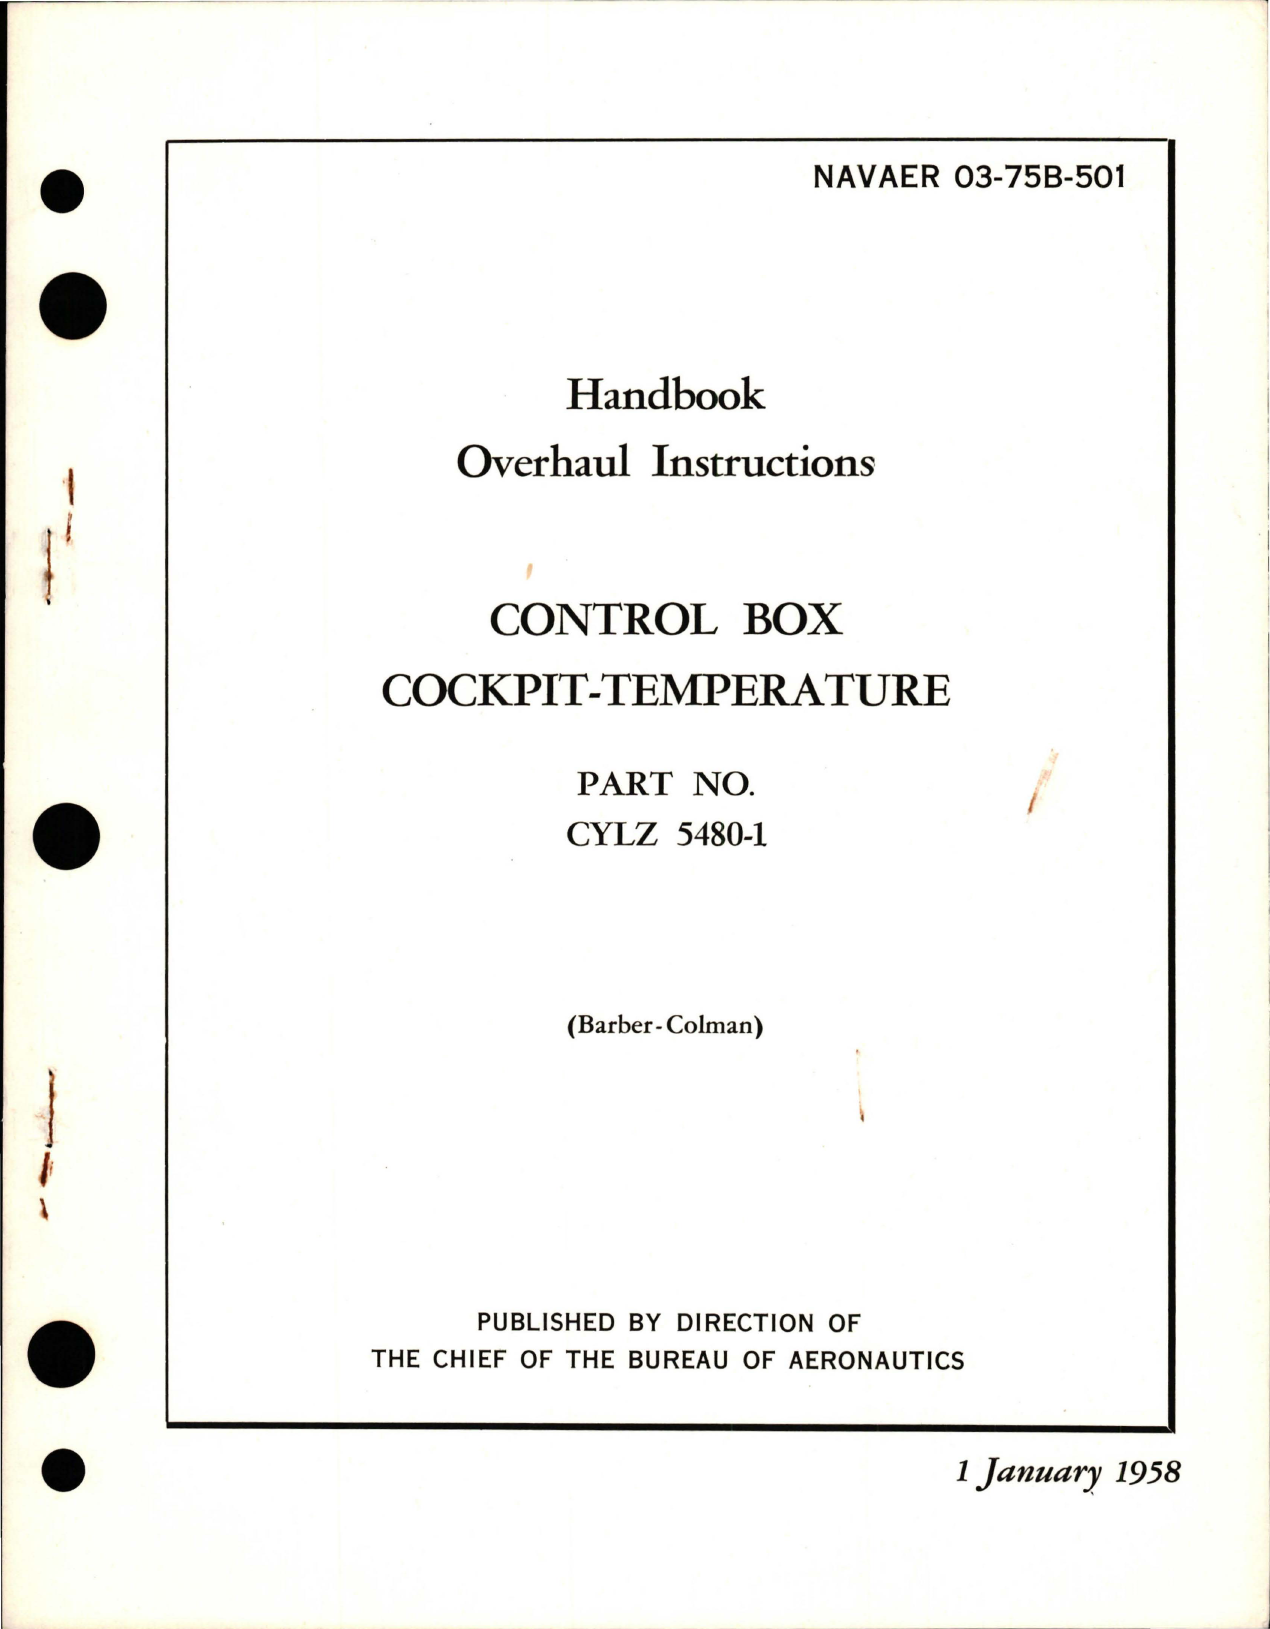 Sample page 1 from AirCorps Library document: Overhaul Instructions for Control Box Cockpit-Temperature - Part CYLZ 5480-1